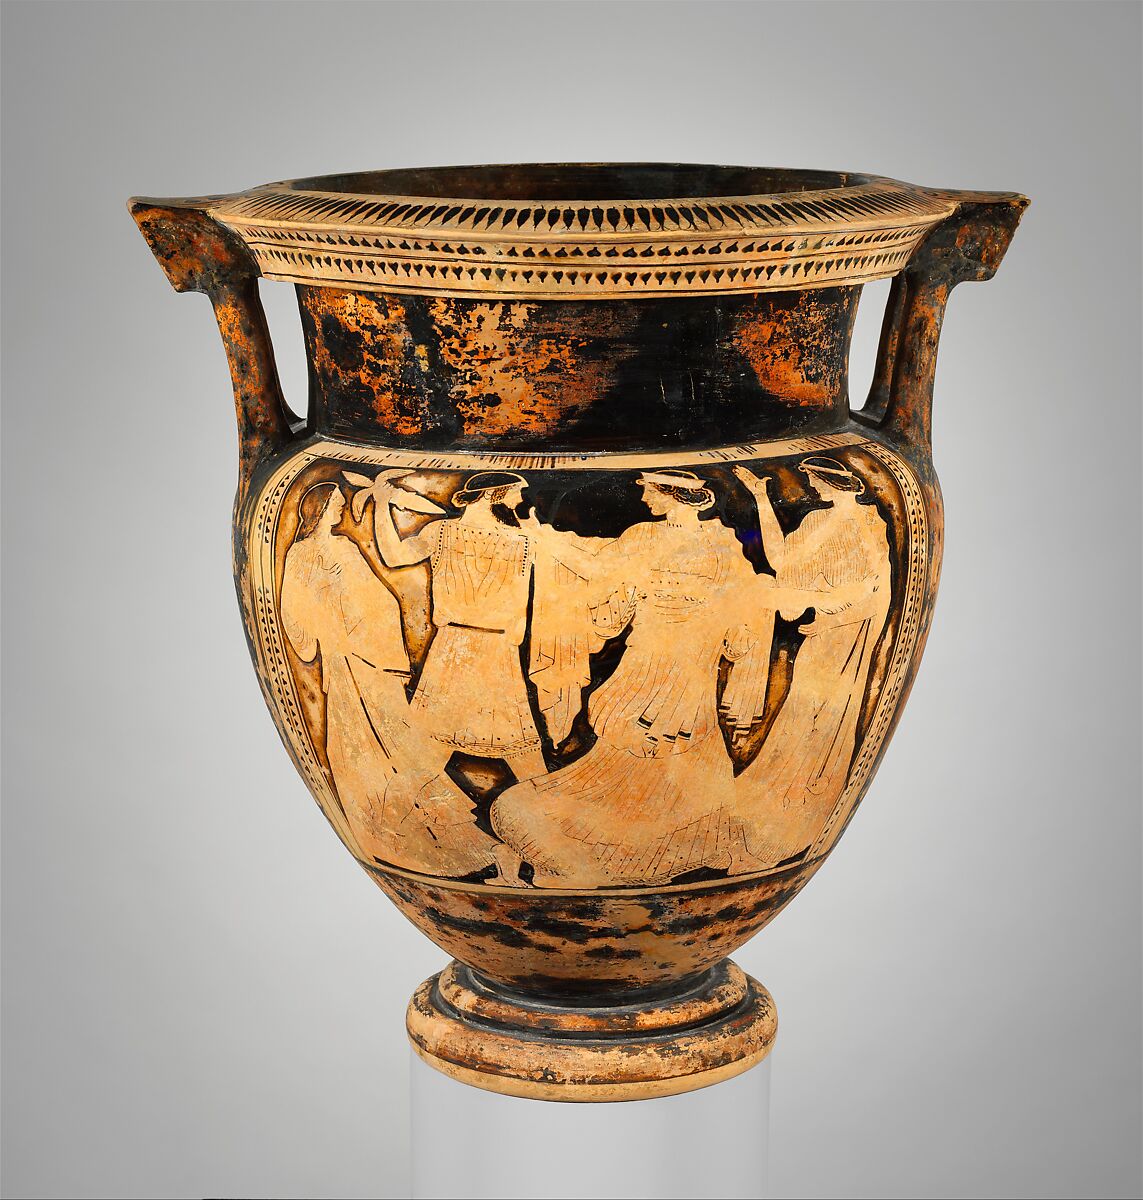 Terracotta column-krater (vase for mixing wine and water), Attributed to the Boreas Painter, Terracotta, Greek, Attic 